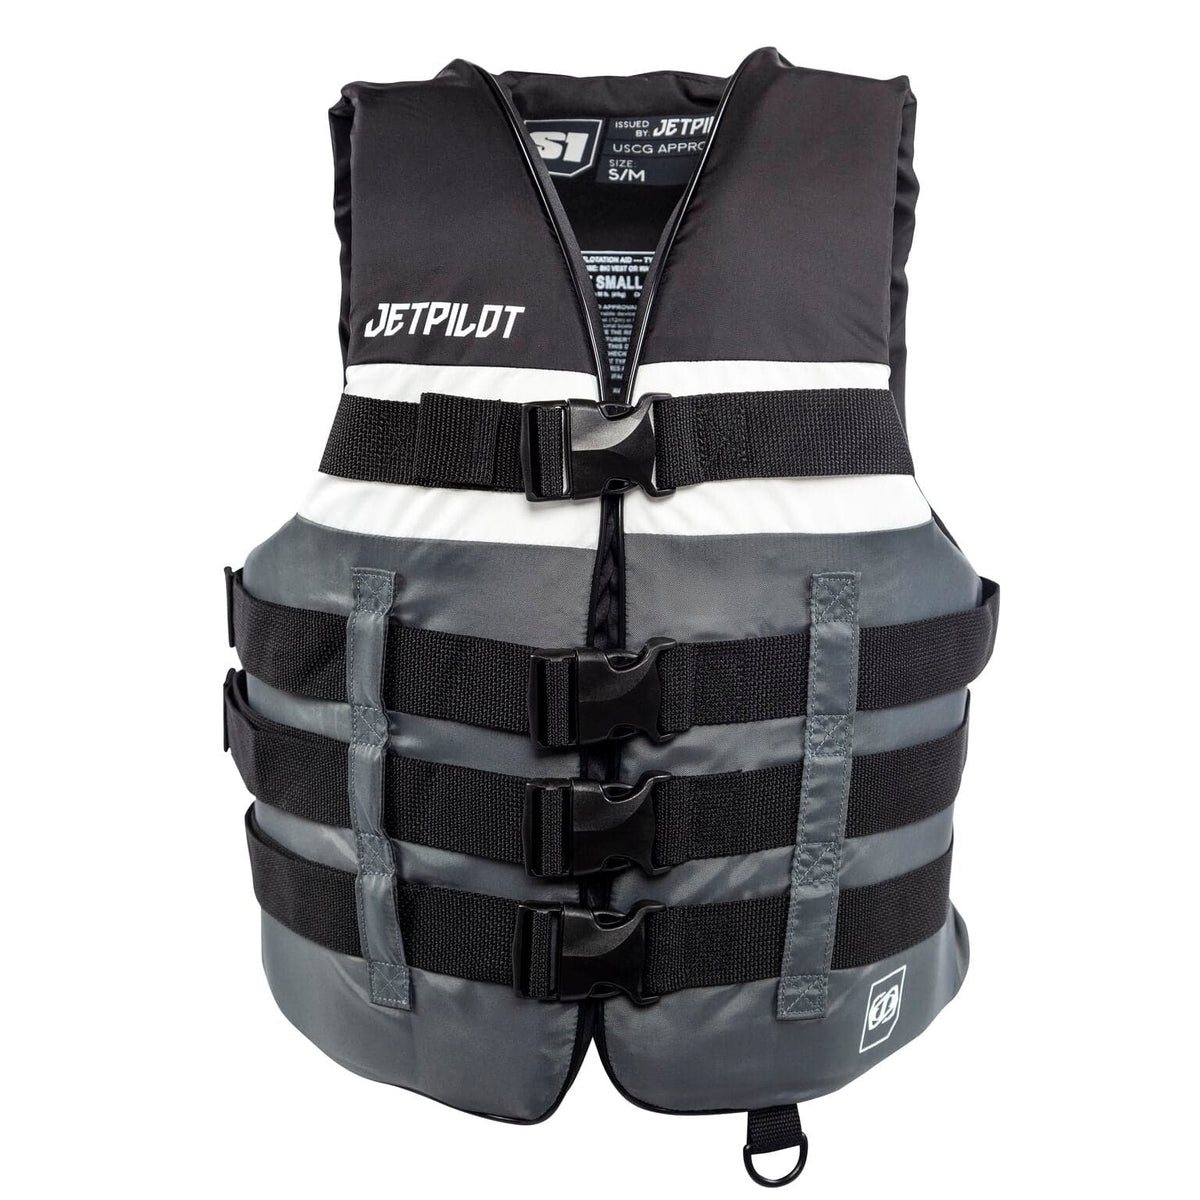 Inflatable life vest - Accessories - Yamaha Motor